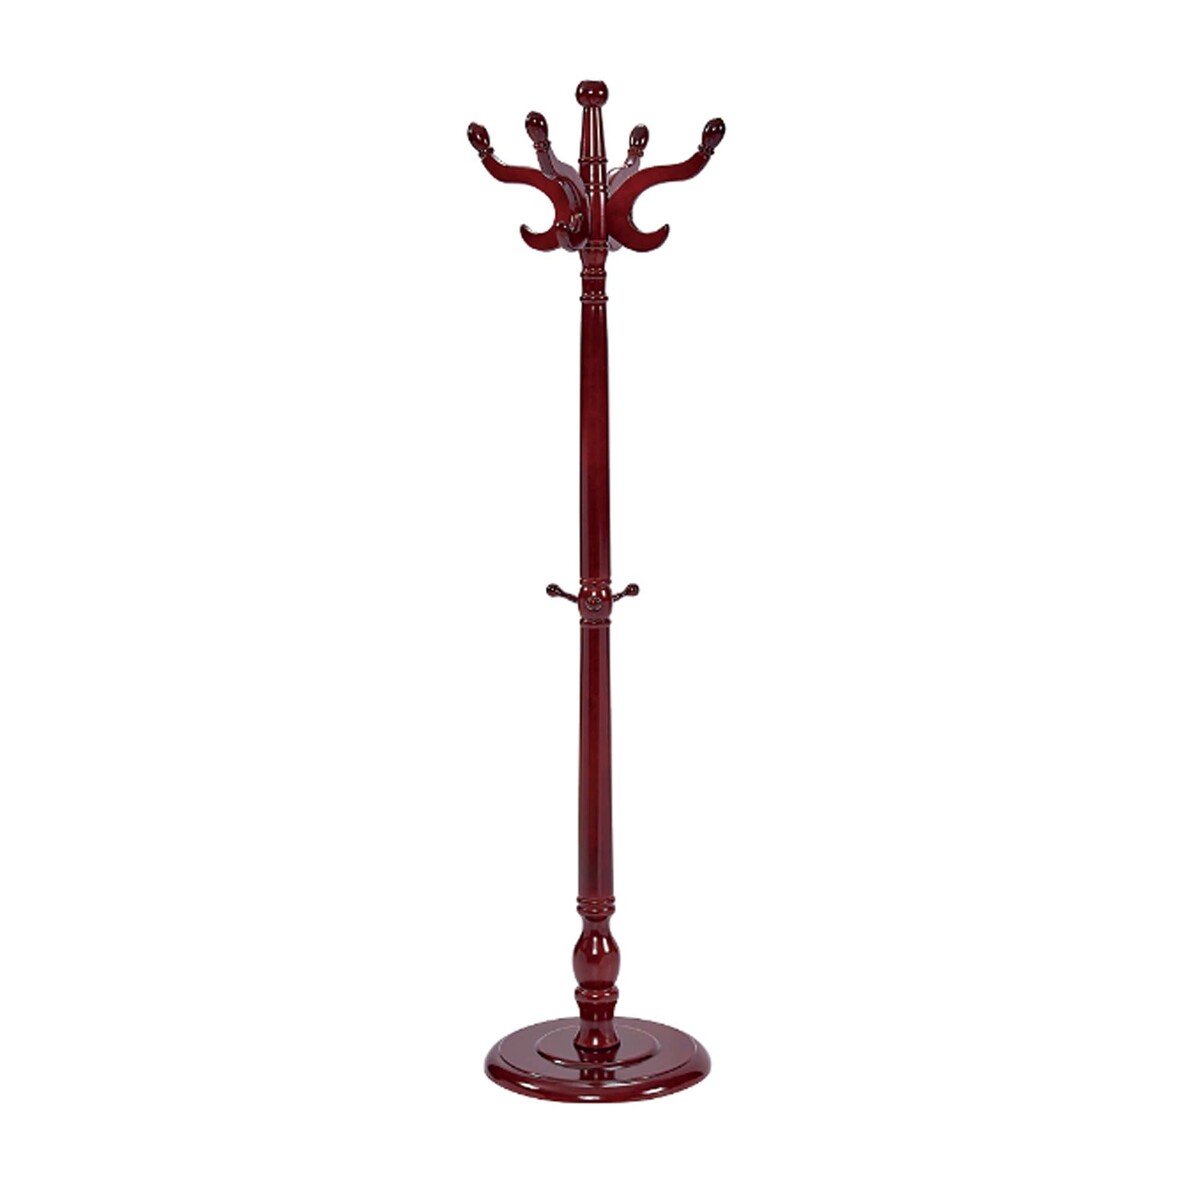 Maple Leaf Wooden Coat Hanging Rack Stand Long M-69 Brown